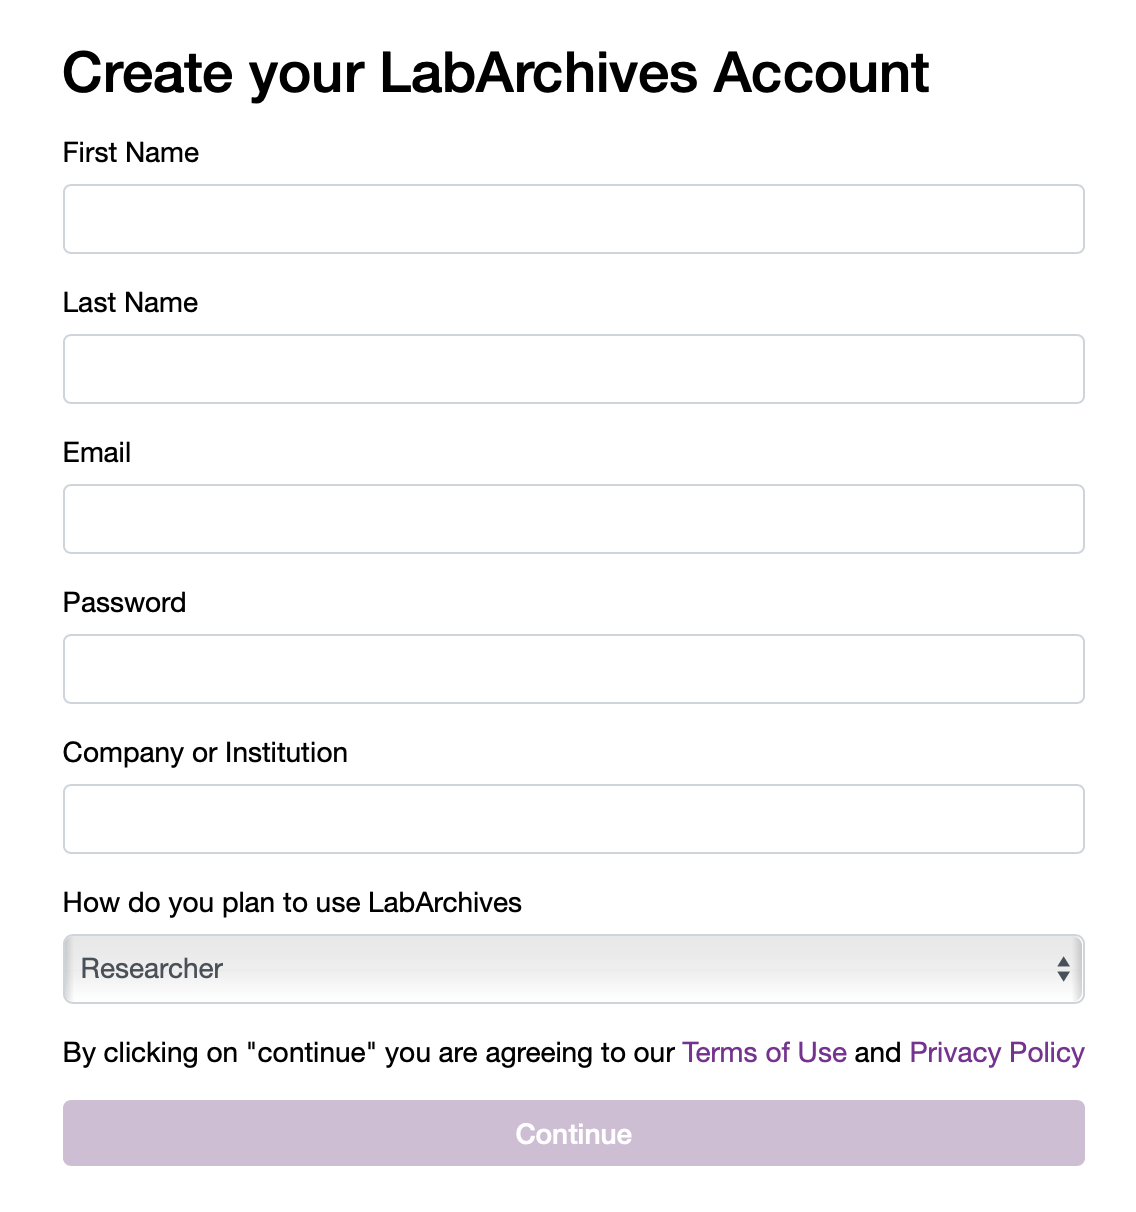 Create_your_LabArchives_Account.png